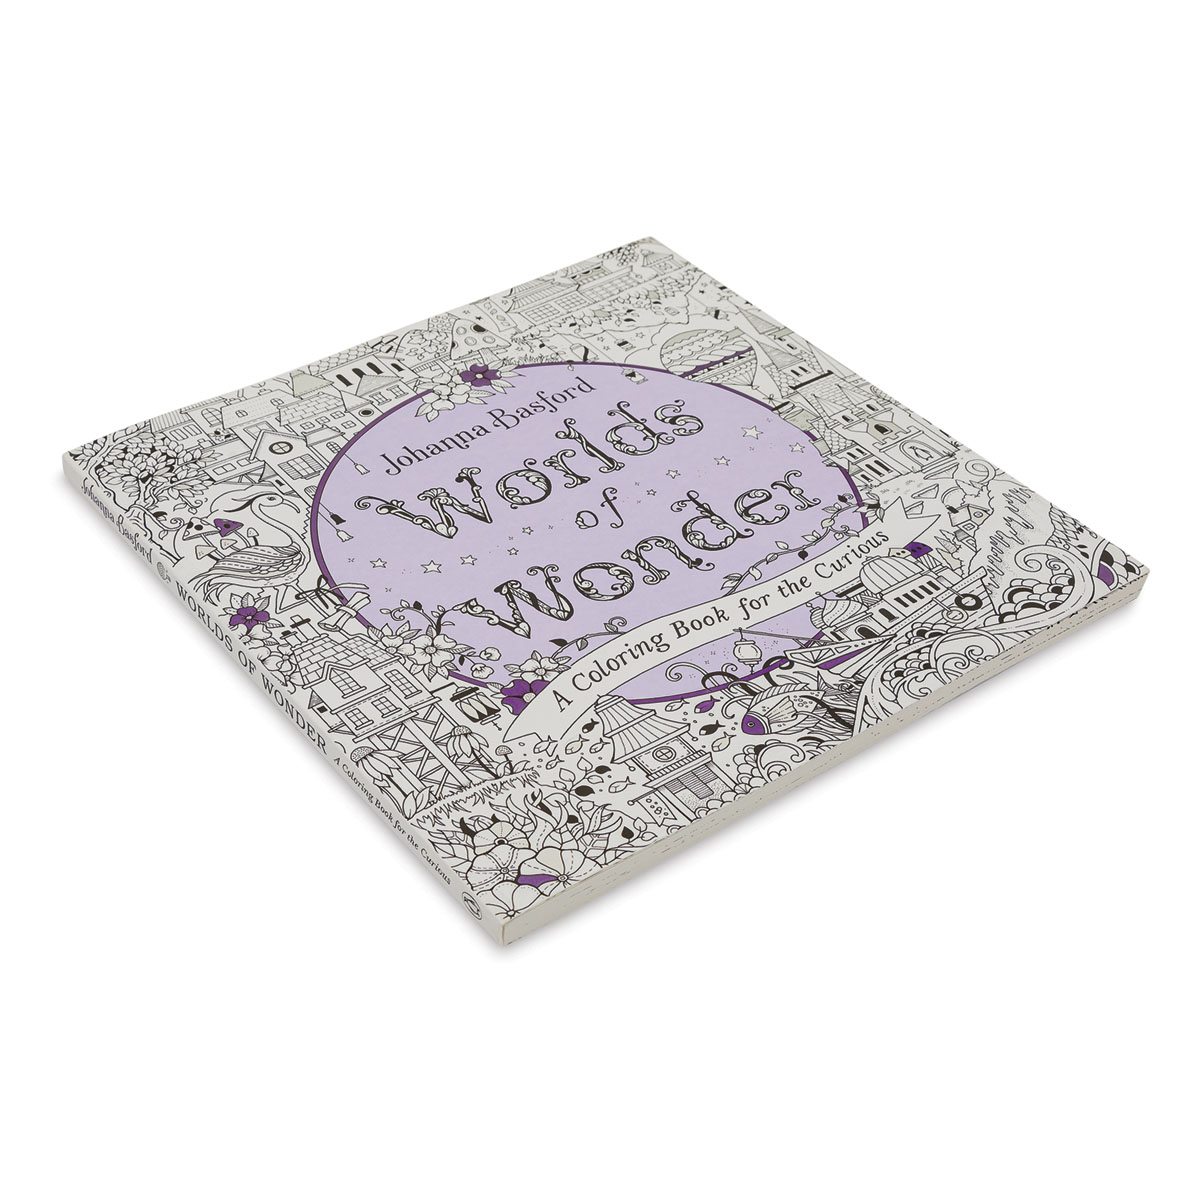  Worlds of Wonder: A Coloring Book for the Curious